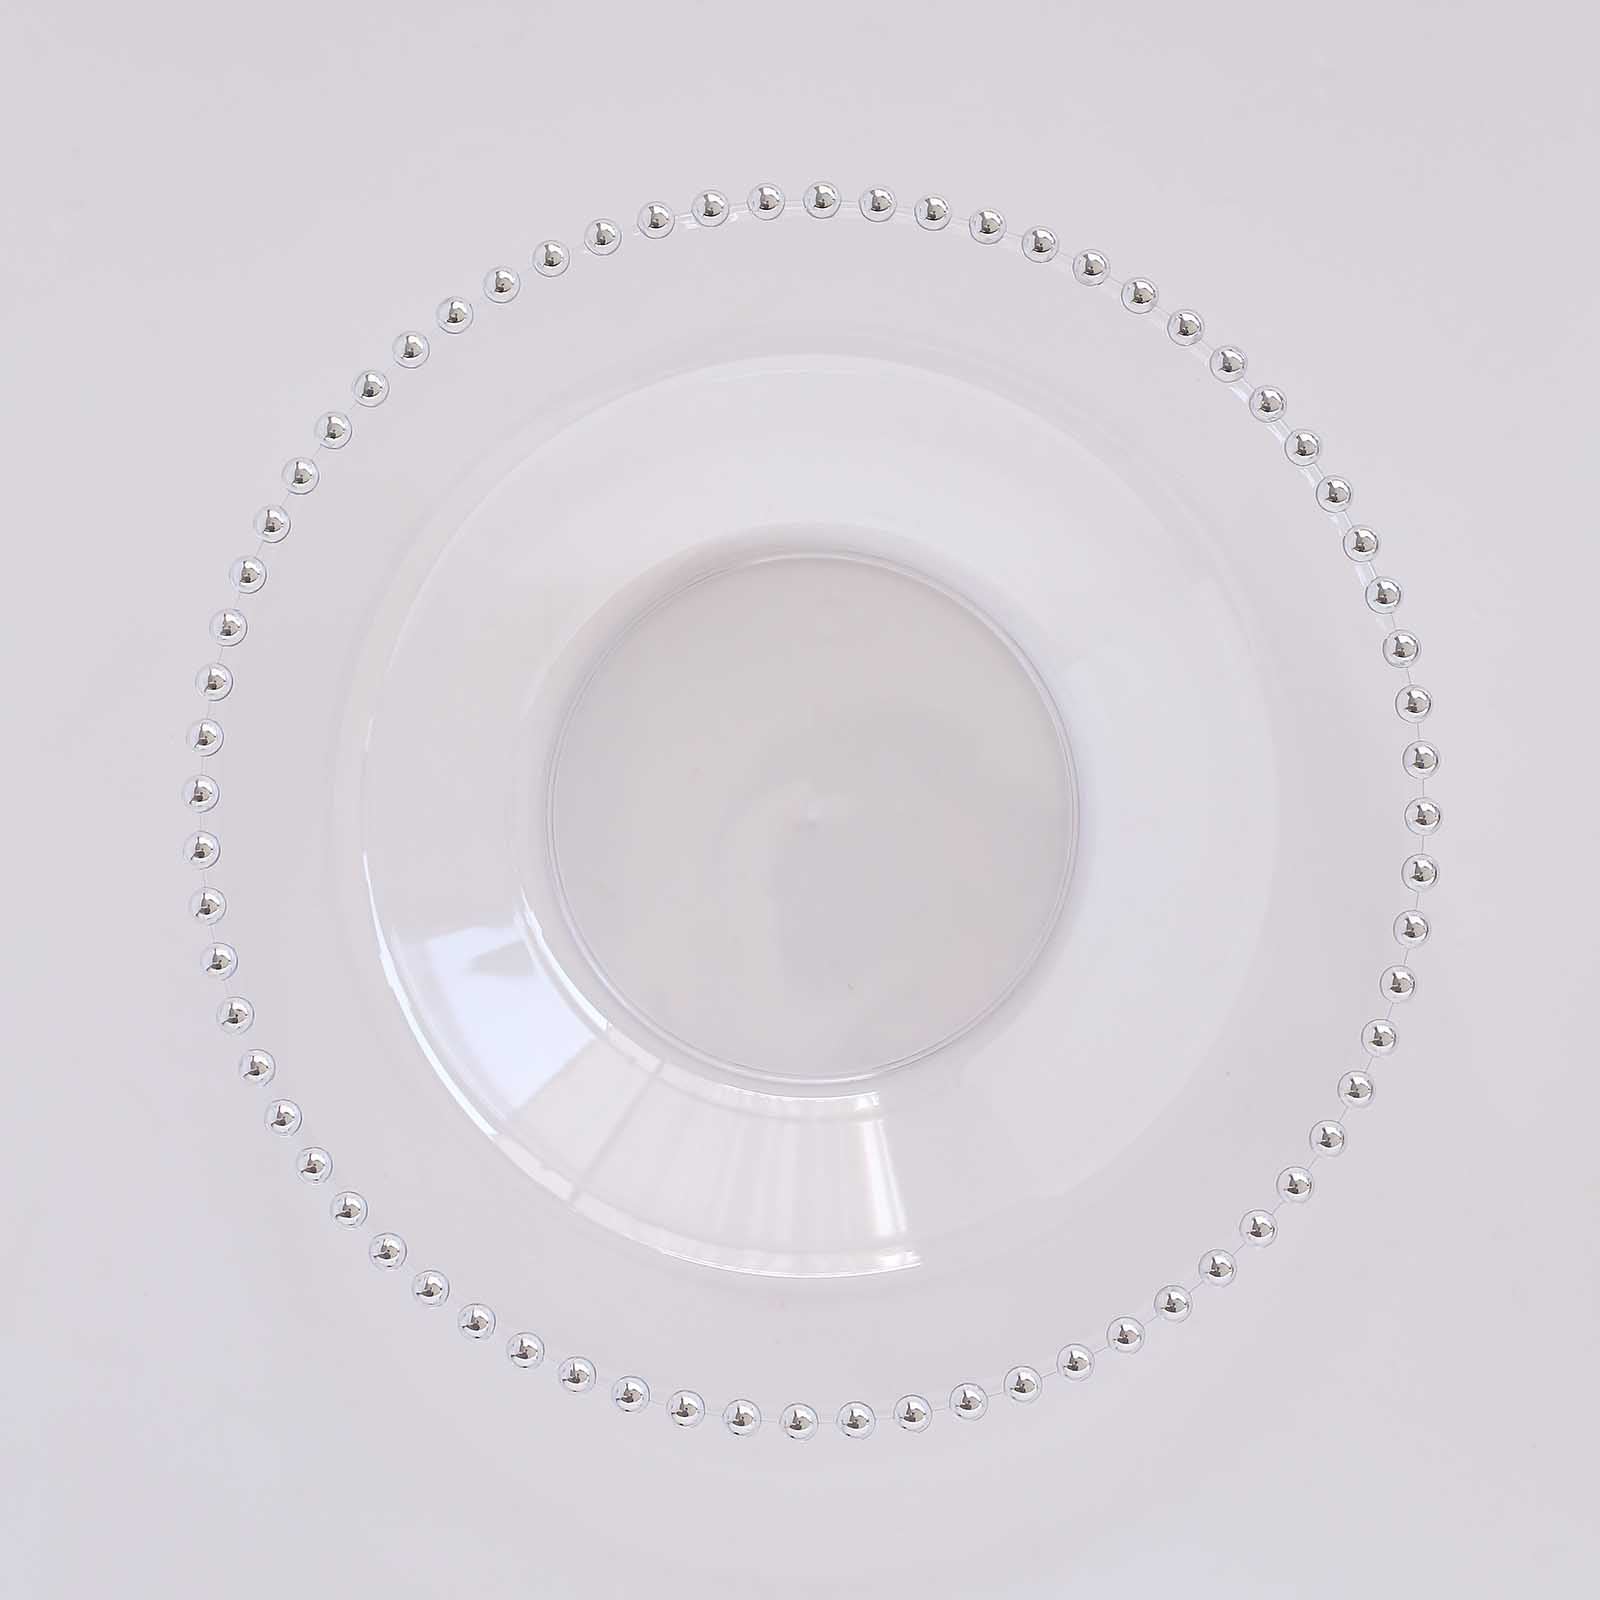 10 Plastic Soup Bowls with Beaded Rim